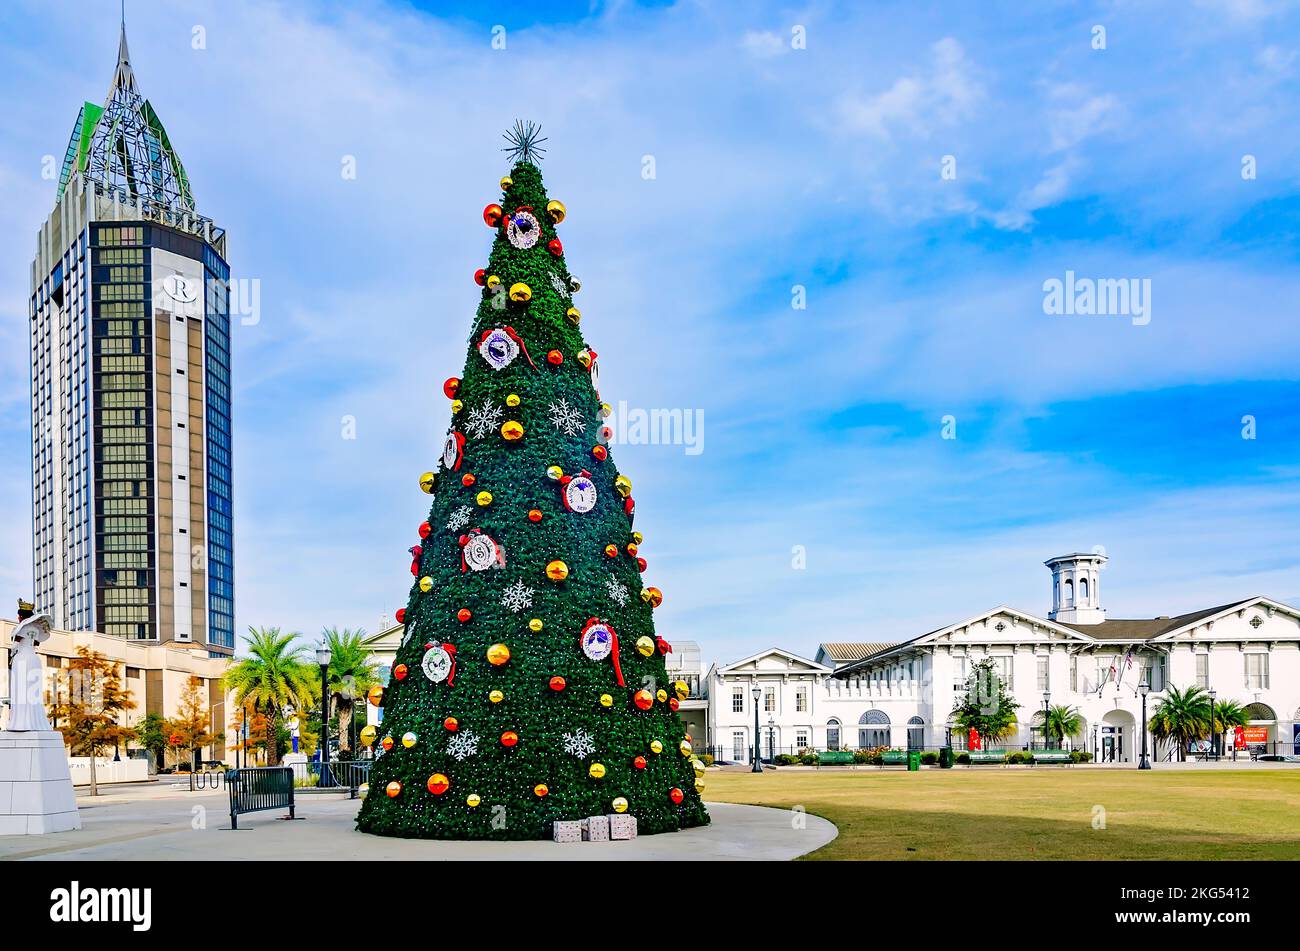 The city Christmas tree is displayed at Mardi Gras Park, Nov. 20, 2022, in Mobile, Alabama. In the background is the Renaissance Riverview Plaza. Stock Photo